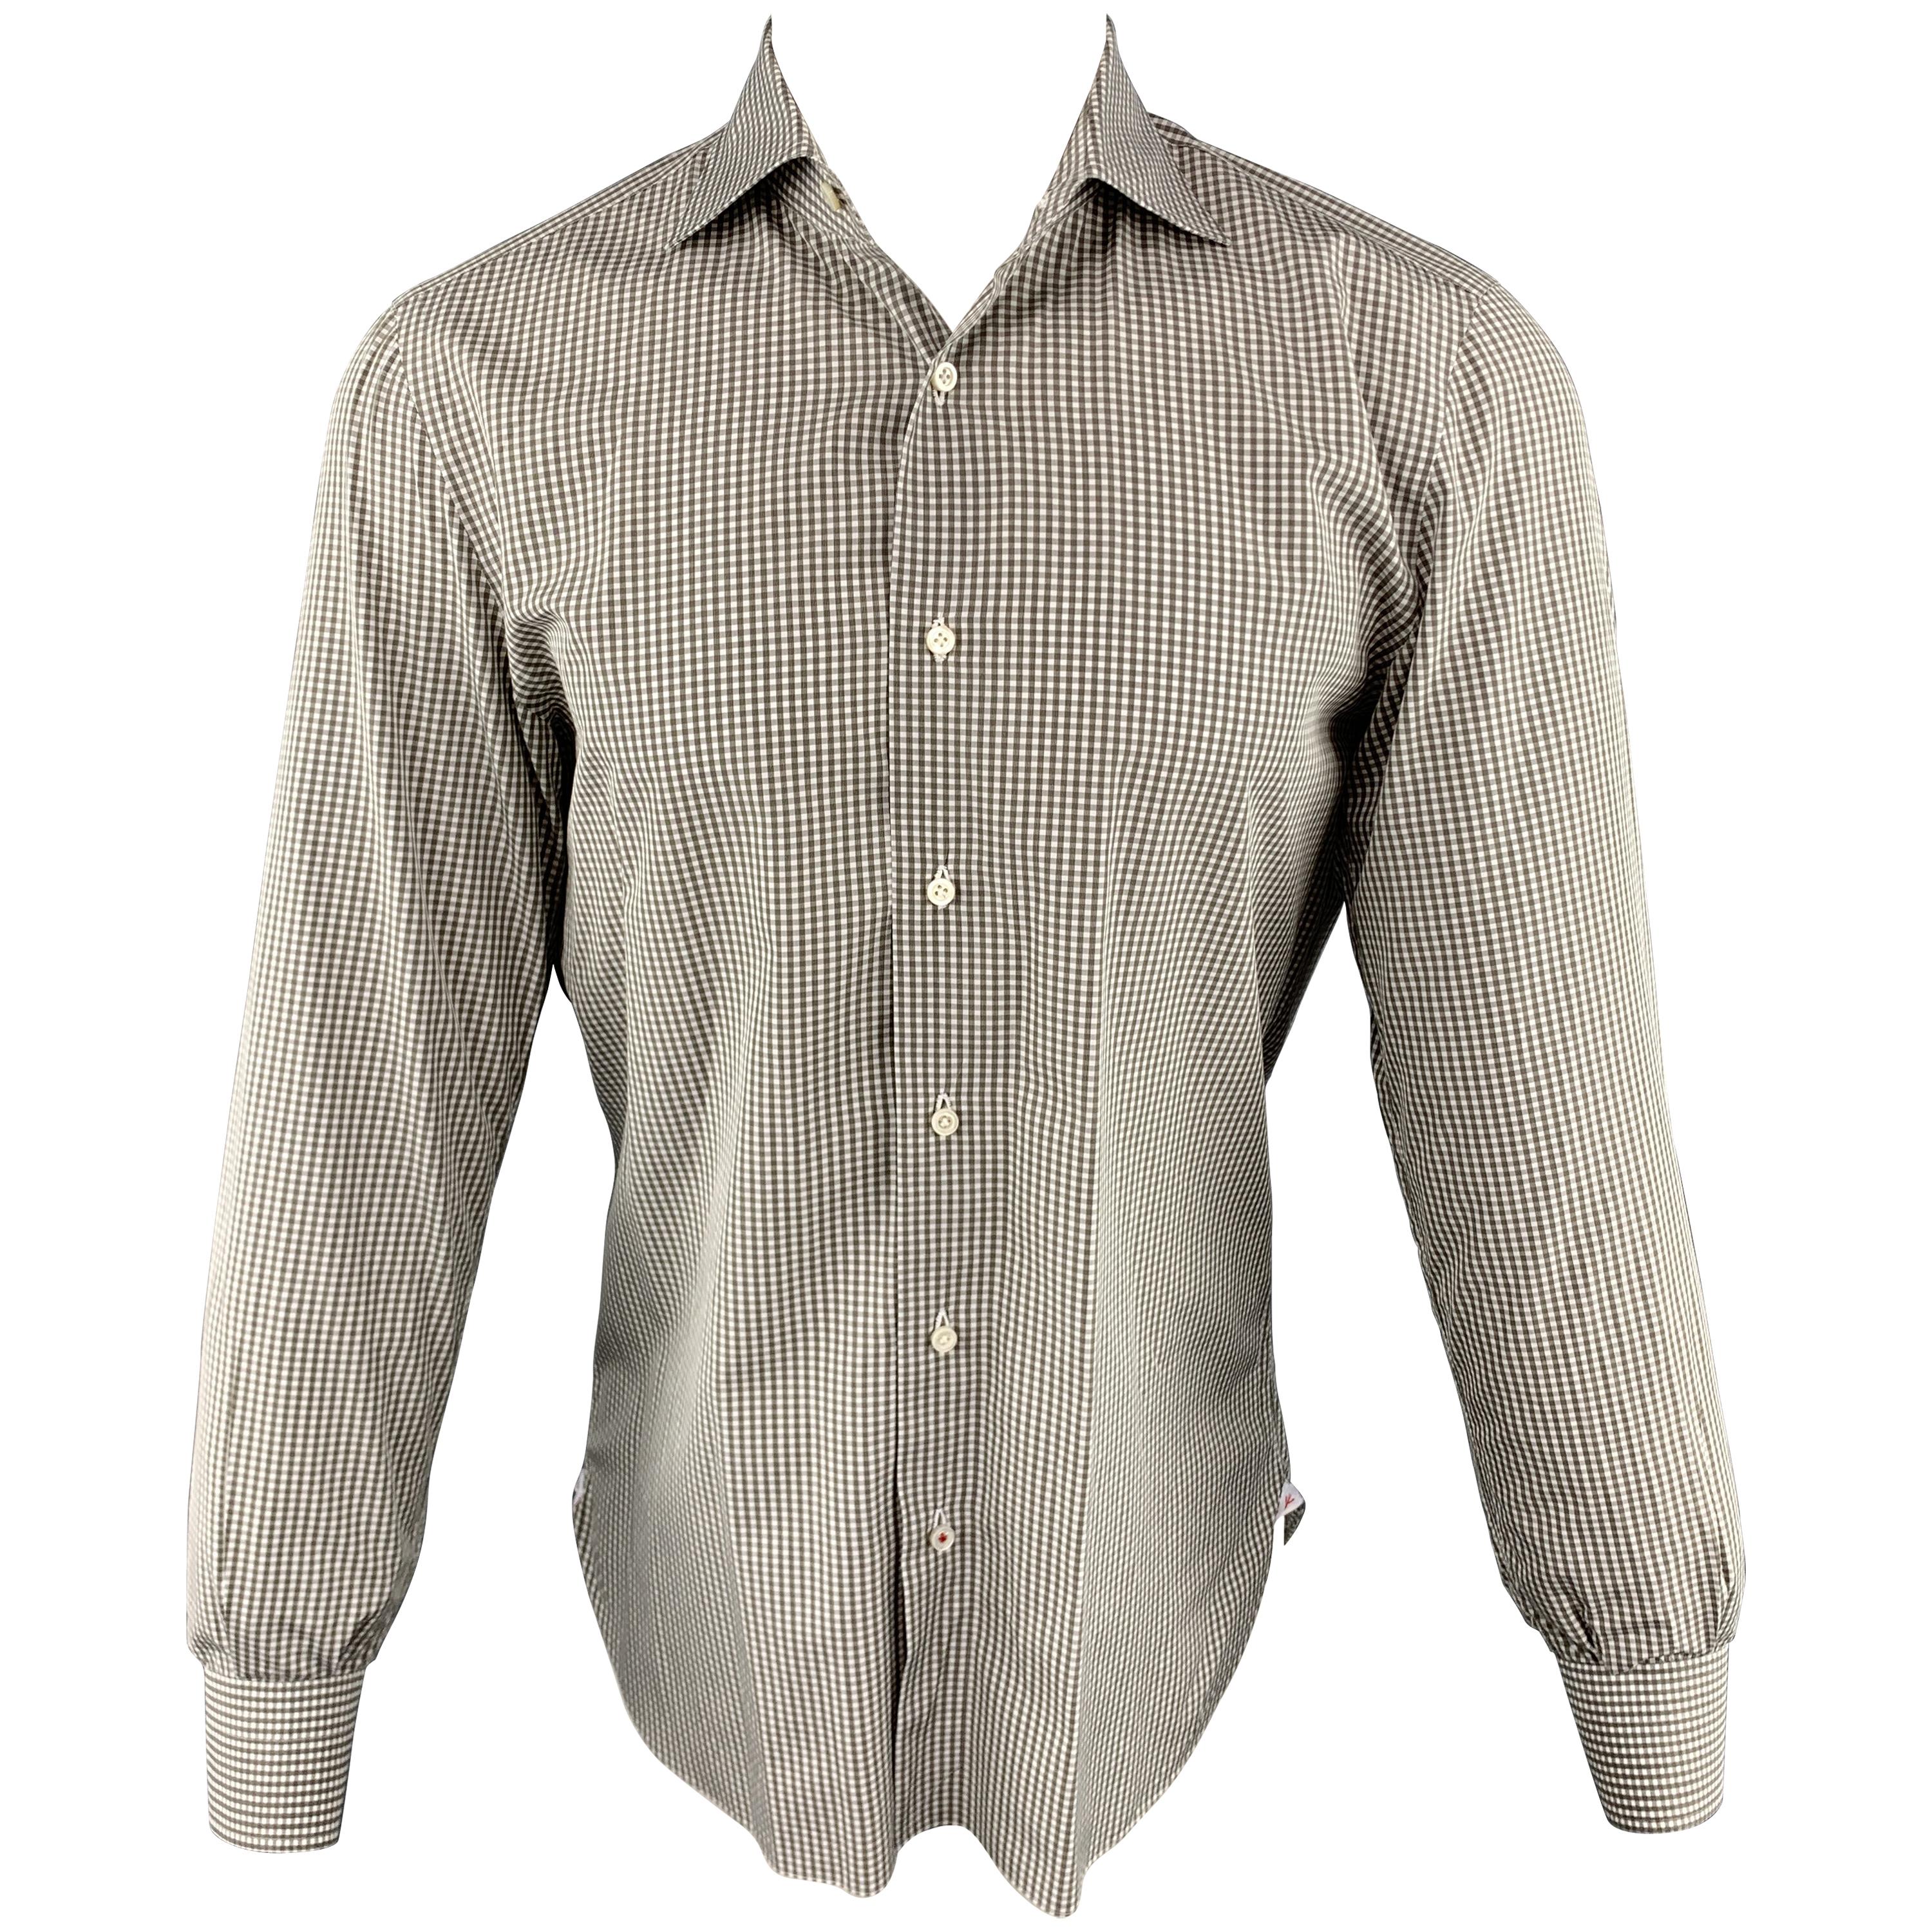 ISAIA Size M Olive & White Checkered Cotton Button Up Long Sleeve Shirt